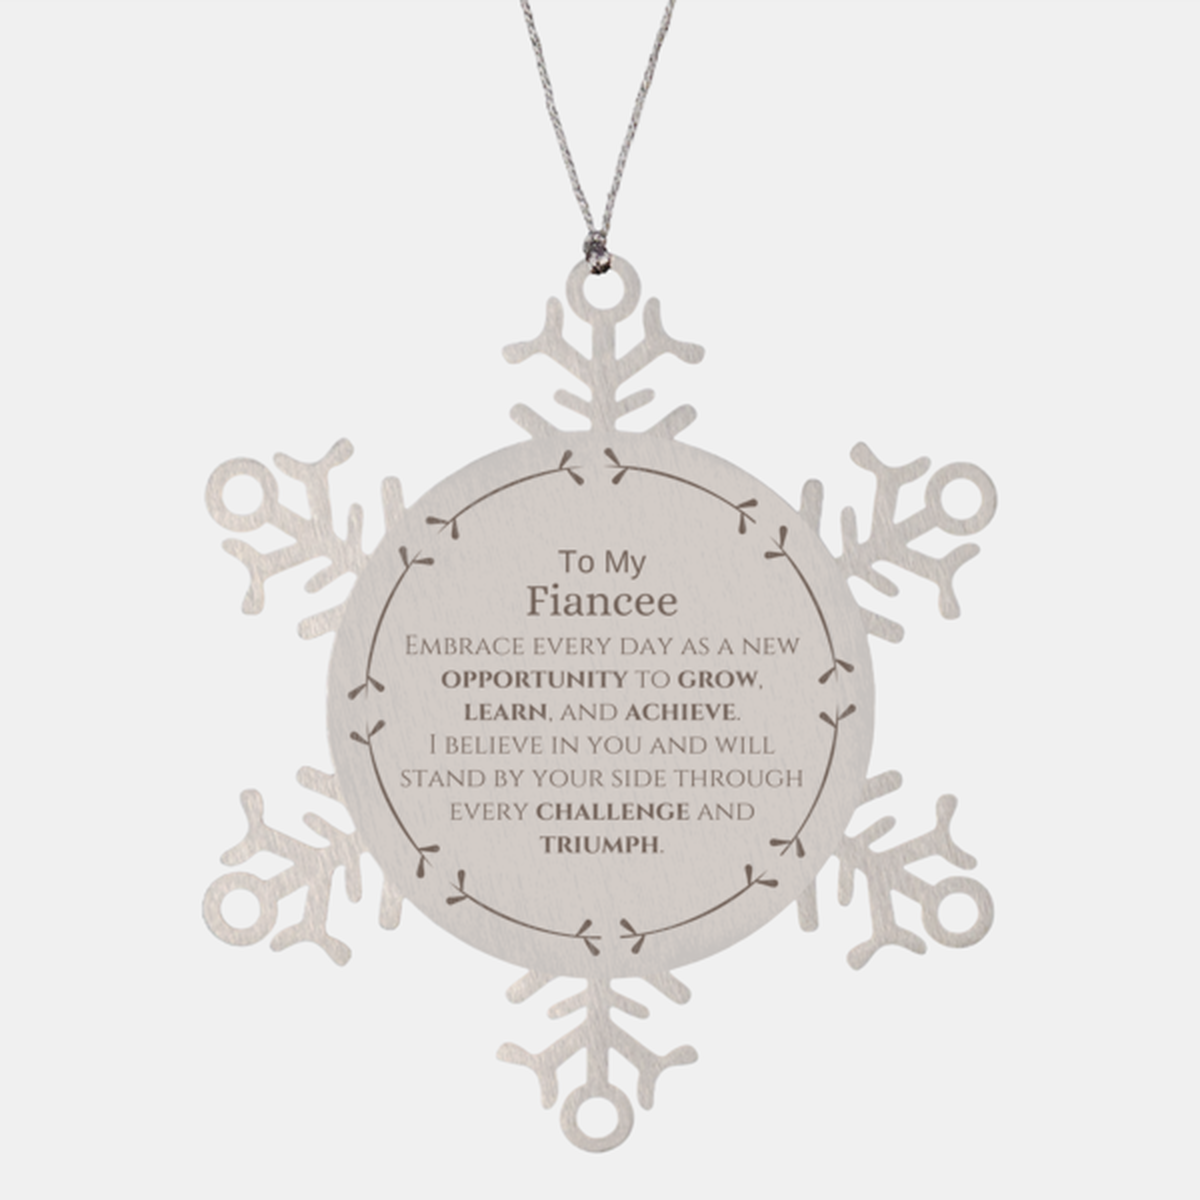 To My Fiancee Gifts, I believe in you and will stand by your side, Inspirational Snowflake Ornament For Fiancee, Birthday Christmas Motivational Fiancee Gifts